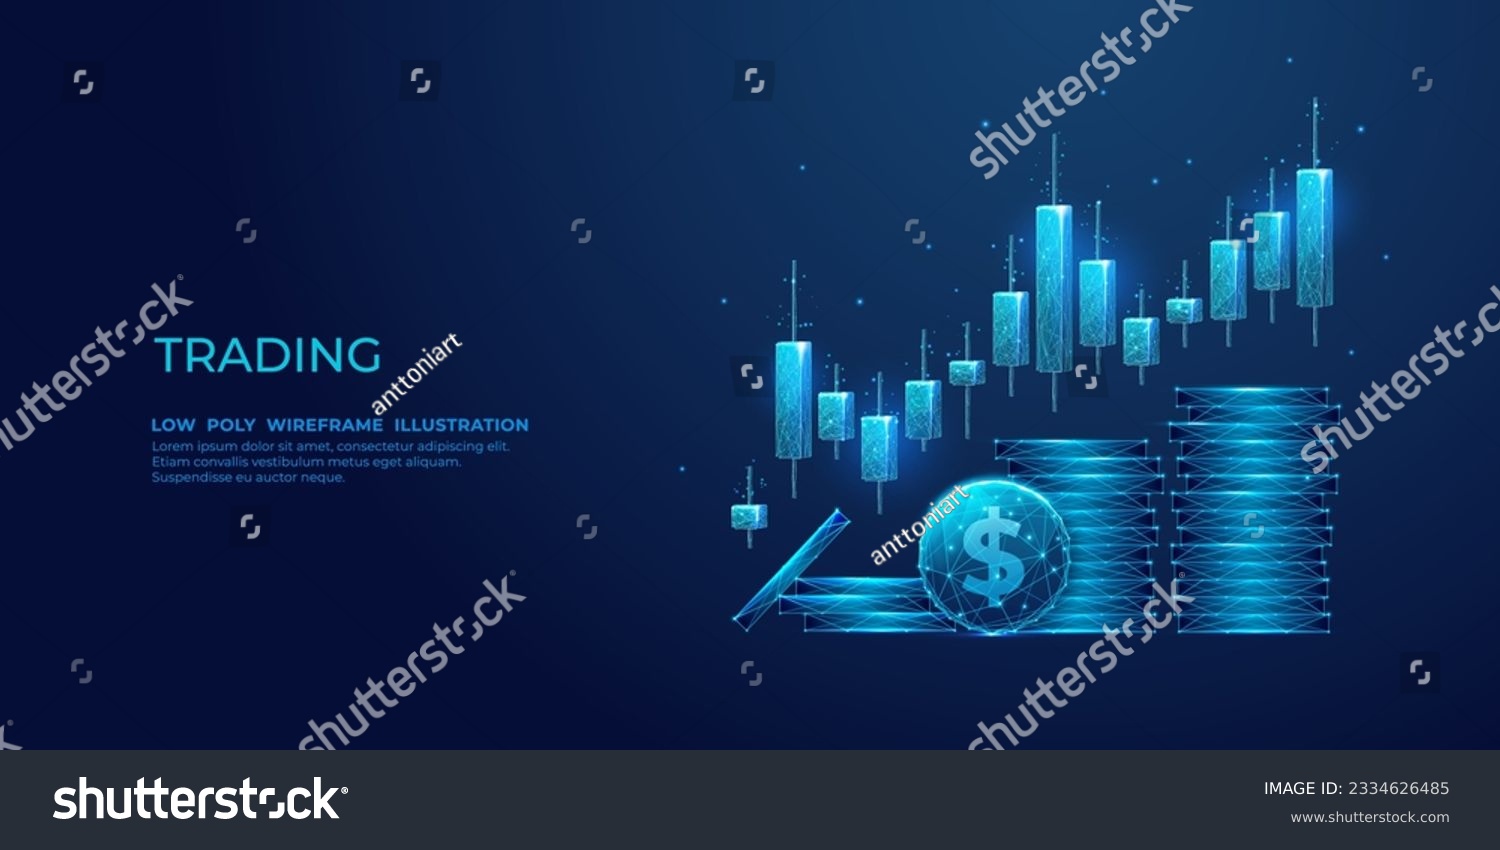 SVG of Digital stock exchange trading. Investment candle sticks and dollar coins in blue modern abstract polygonal style with 3D effect on the technological background. Low poly wireframe vector illustration svg